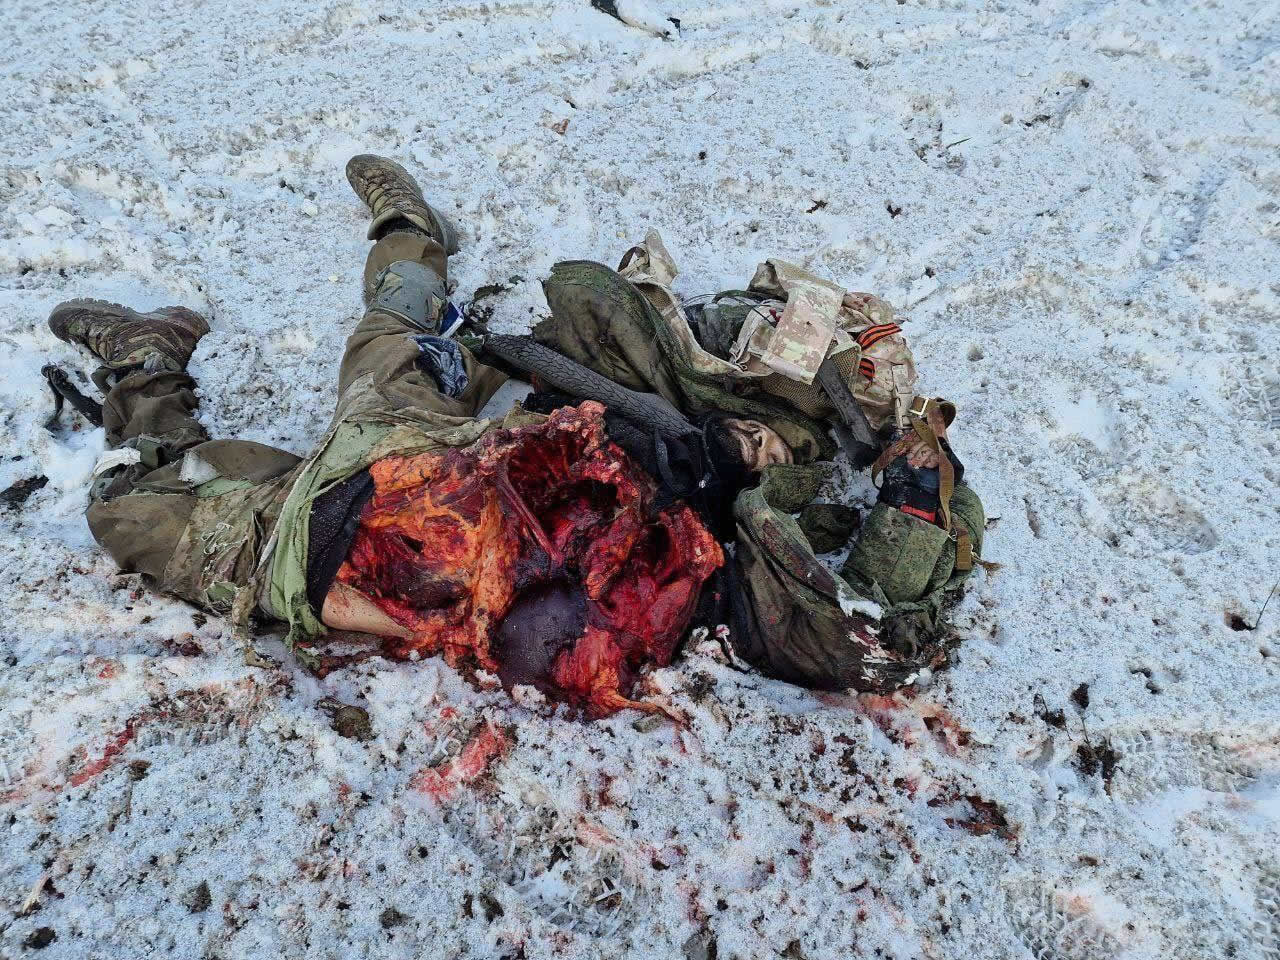 The corpse of a Russian soldier with a torn belly and chest